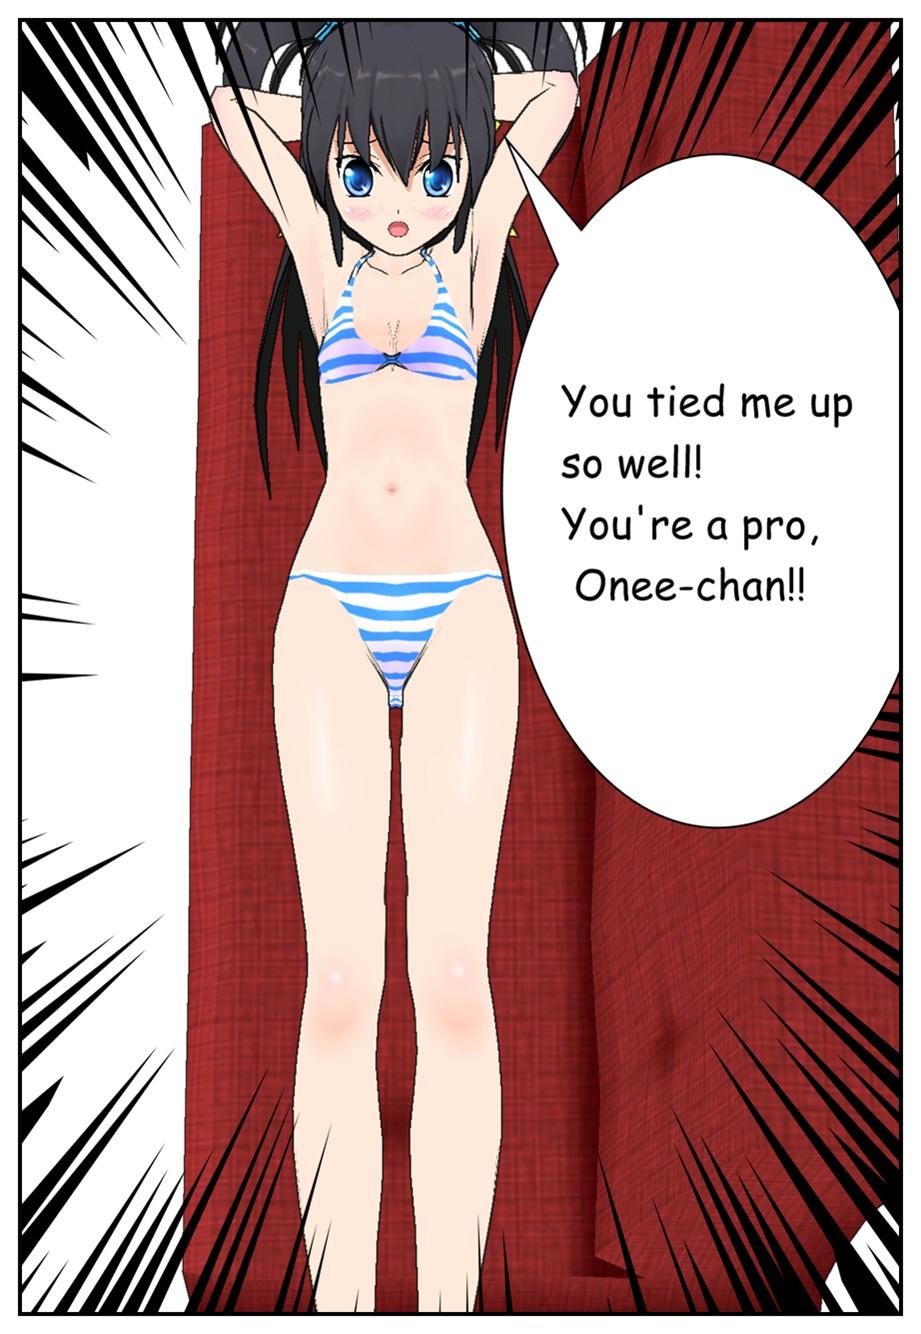 Onee-chan is a perv! 8